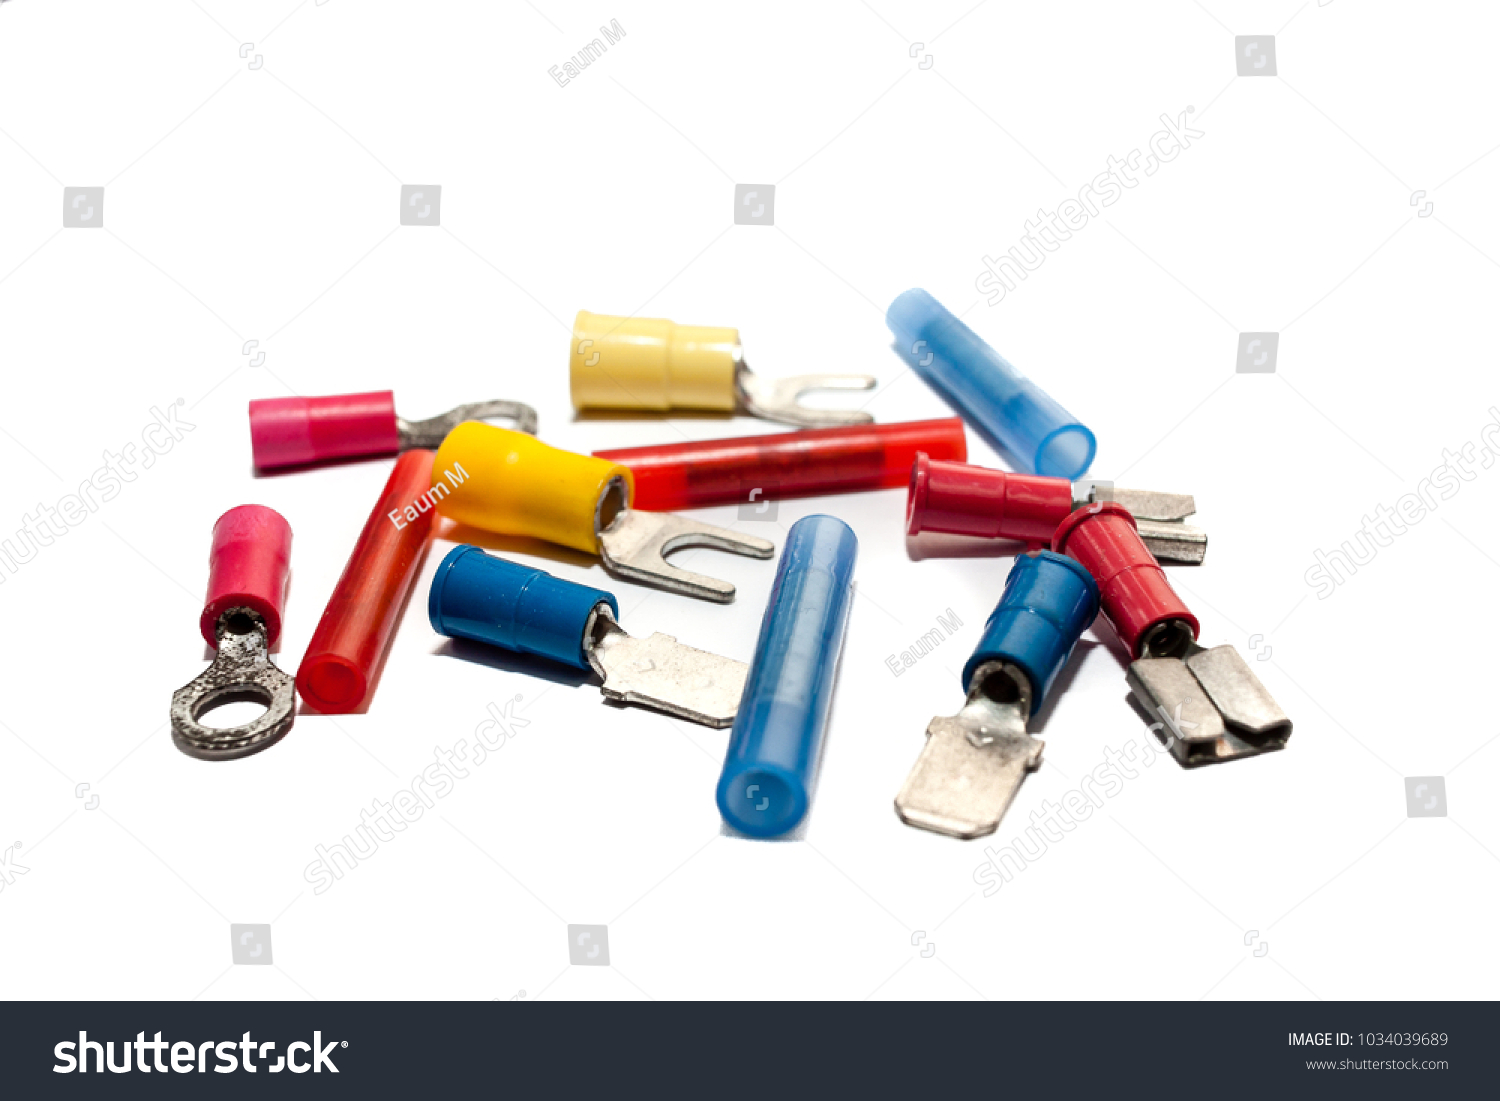 Electrical wire connector, Butt Splice connector, Ferrules, Fork Terminal, Pin Terminal, Ring Terminal, Wire Disconnect on white background. #1034039689